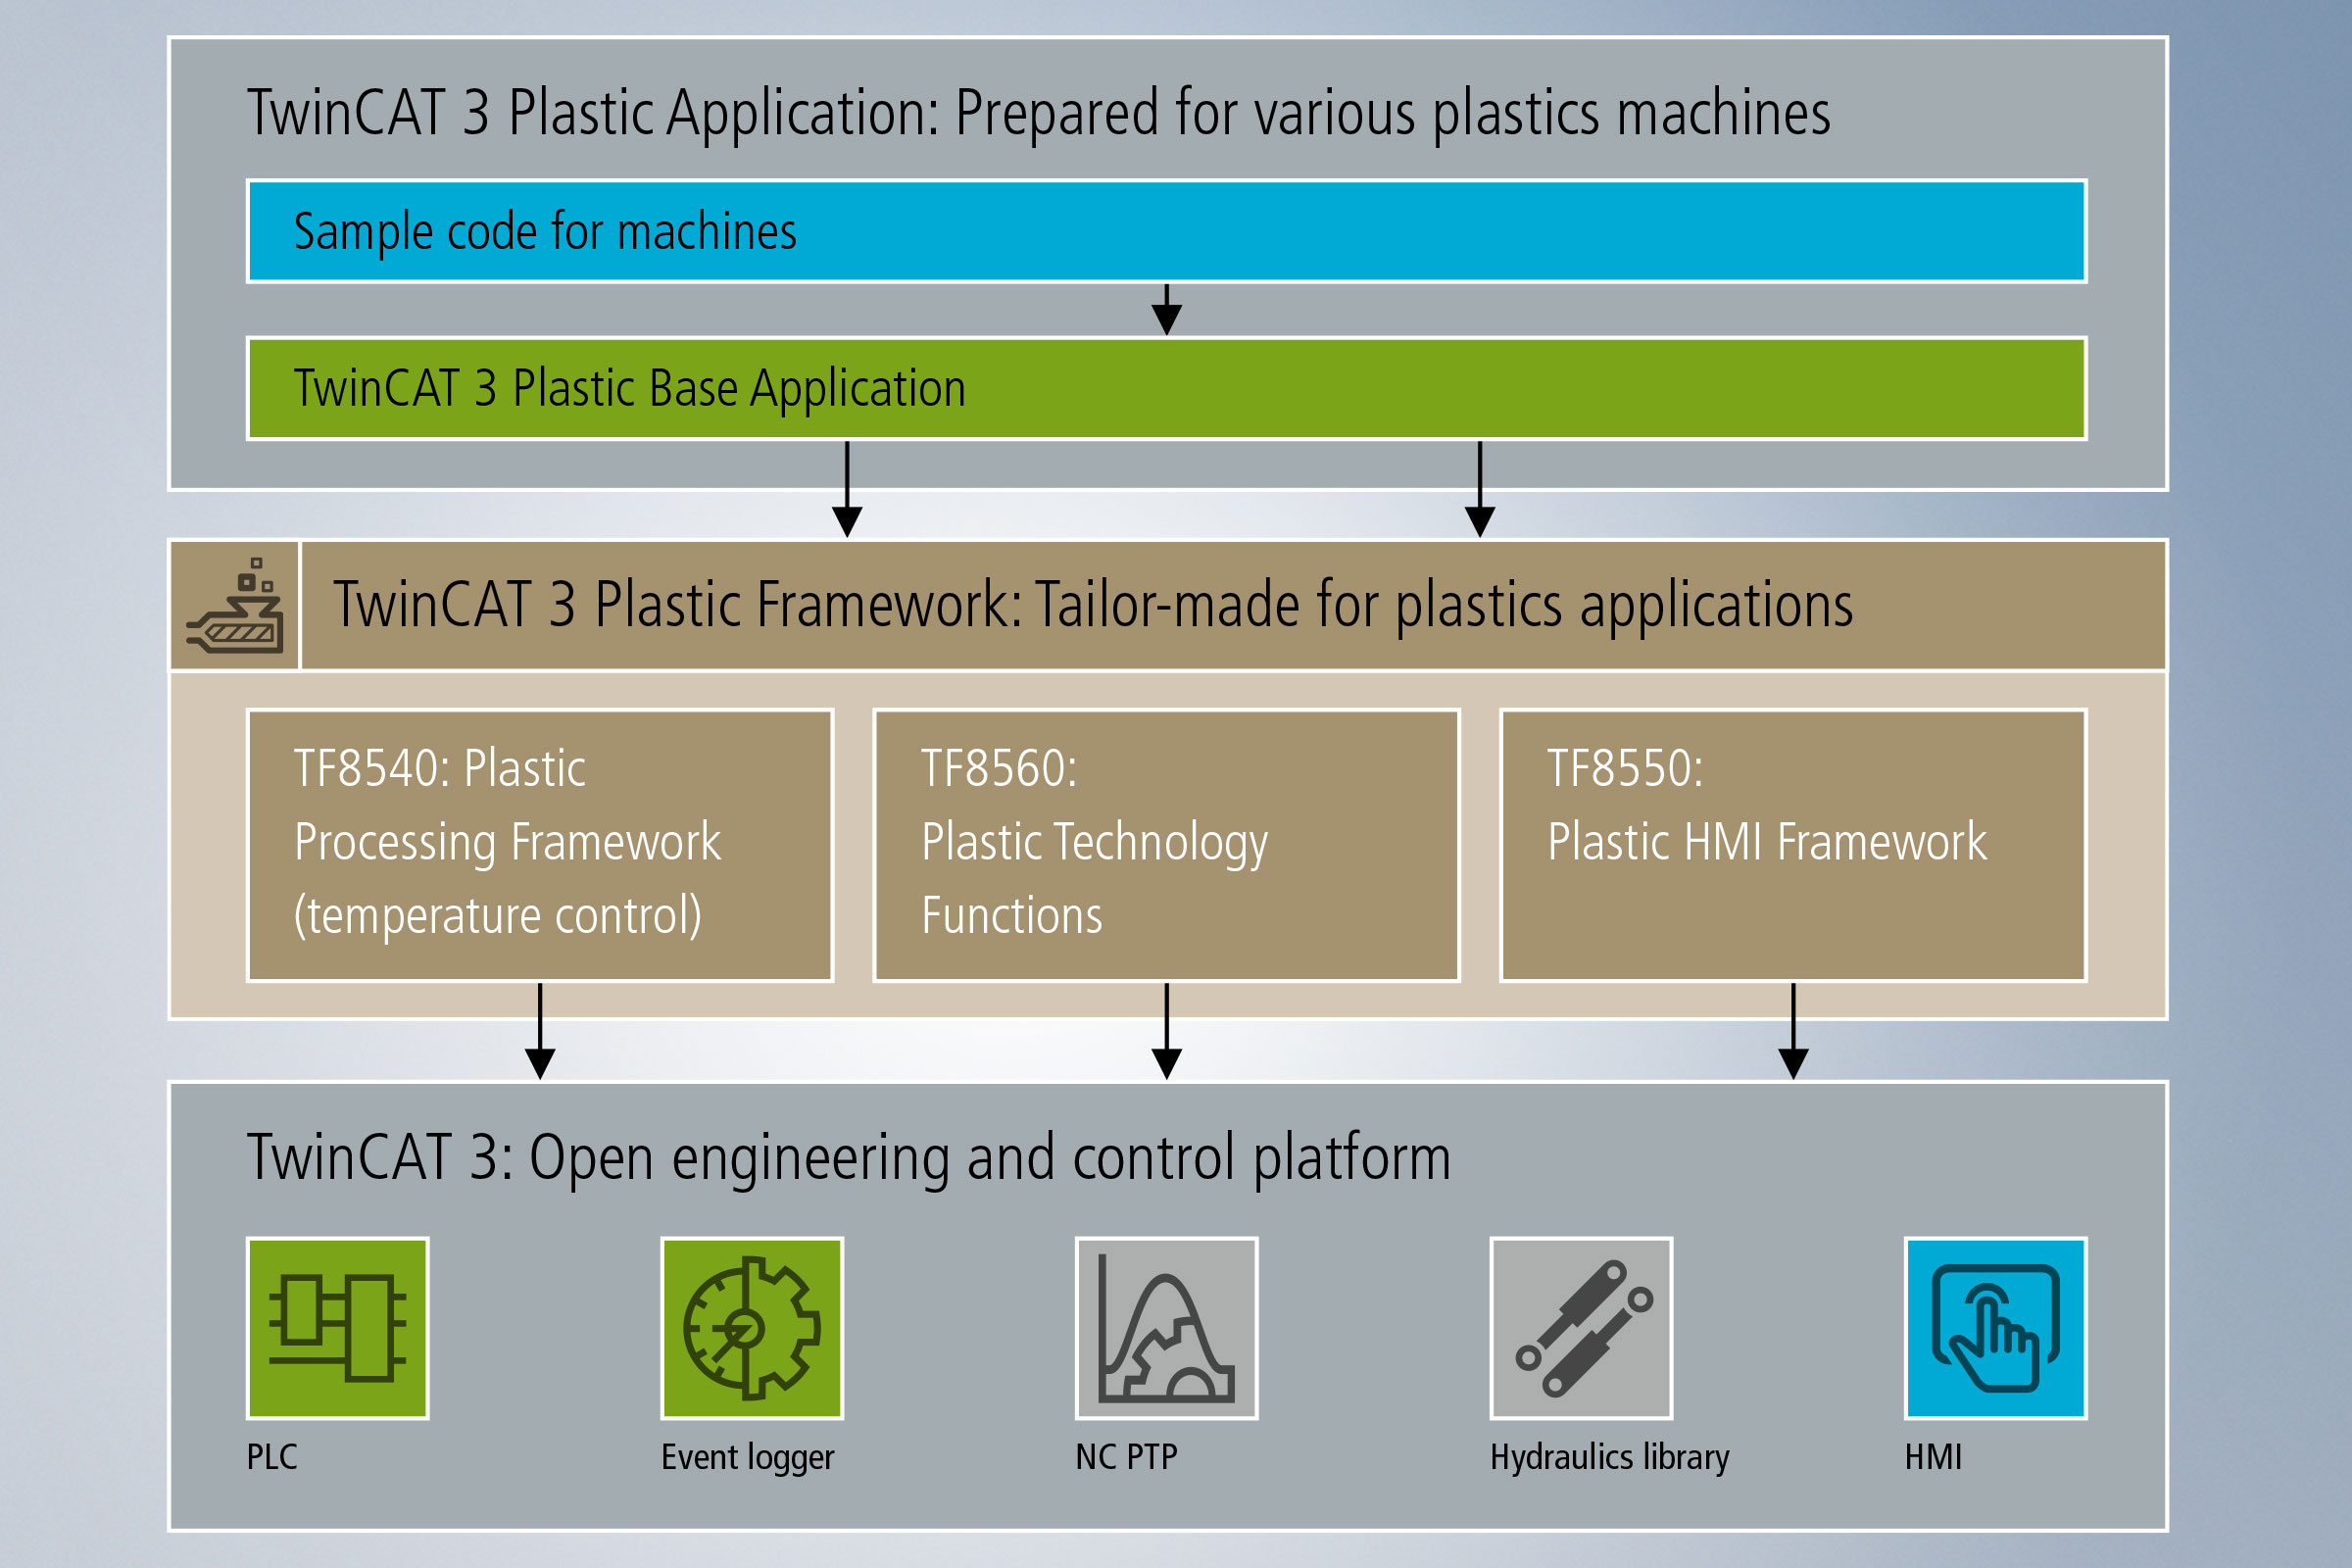 The TwinCAT 3 Plastic Framework integrates important industry-specific control functions into the TwinCAT environment. 